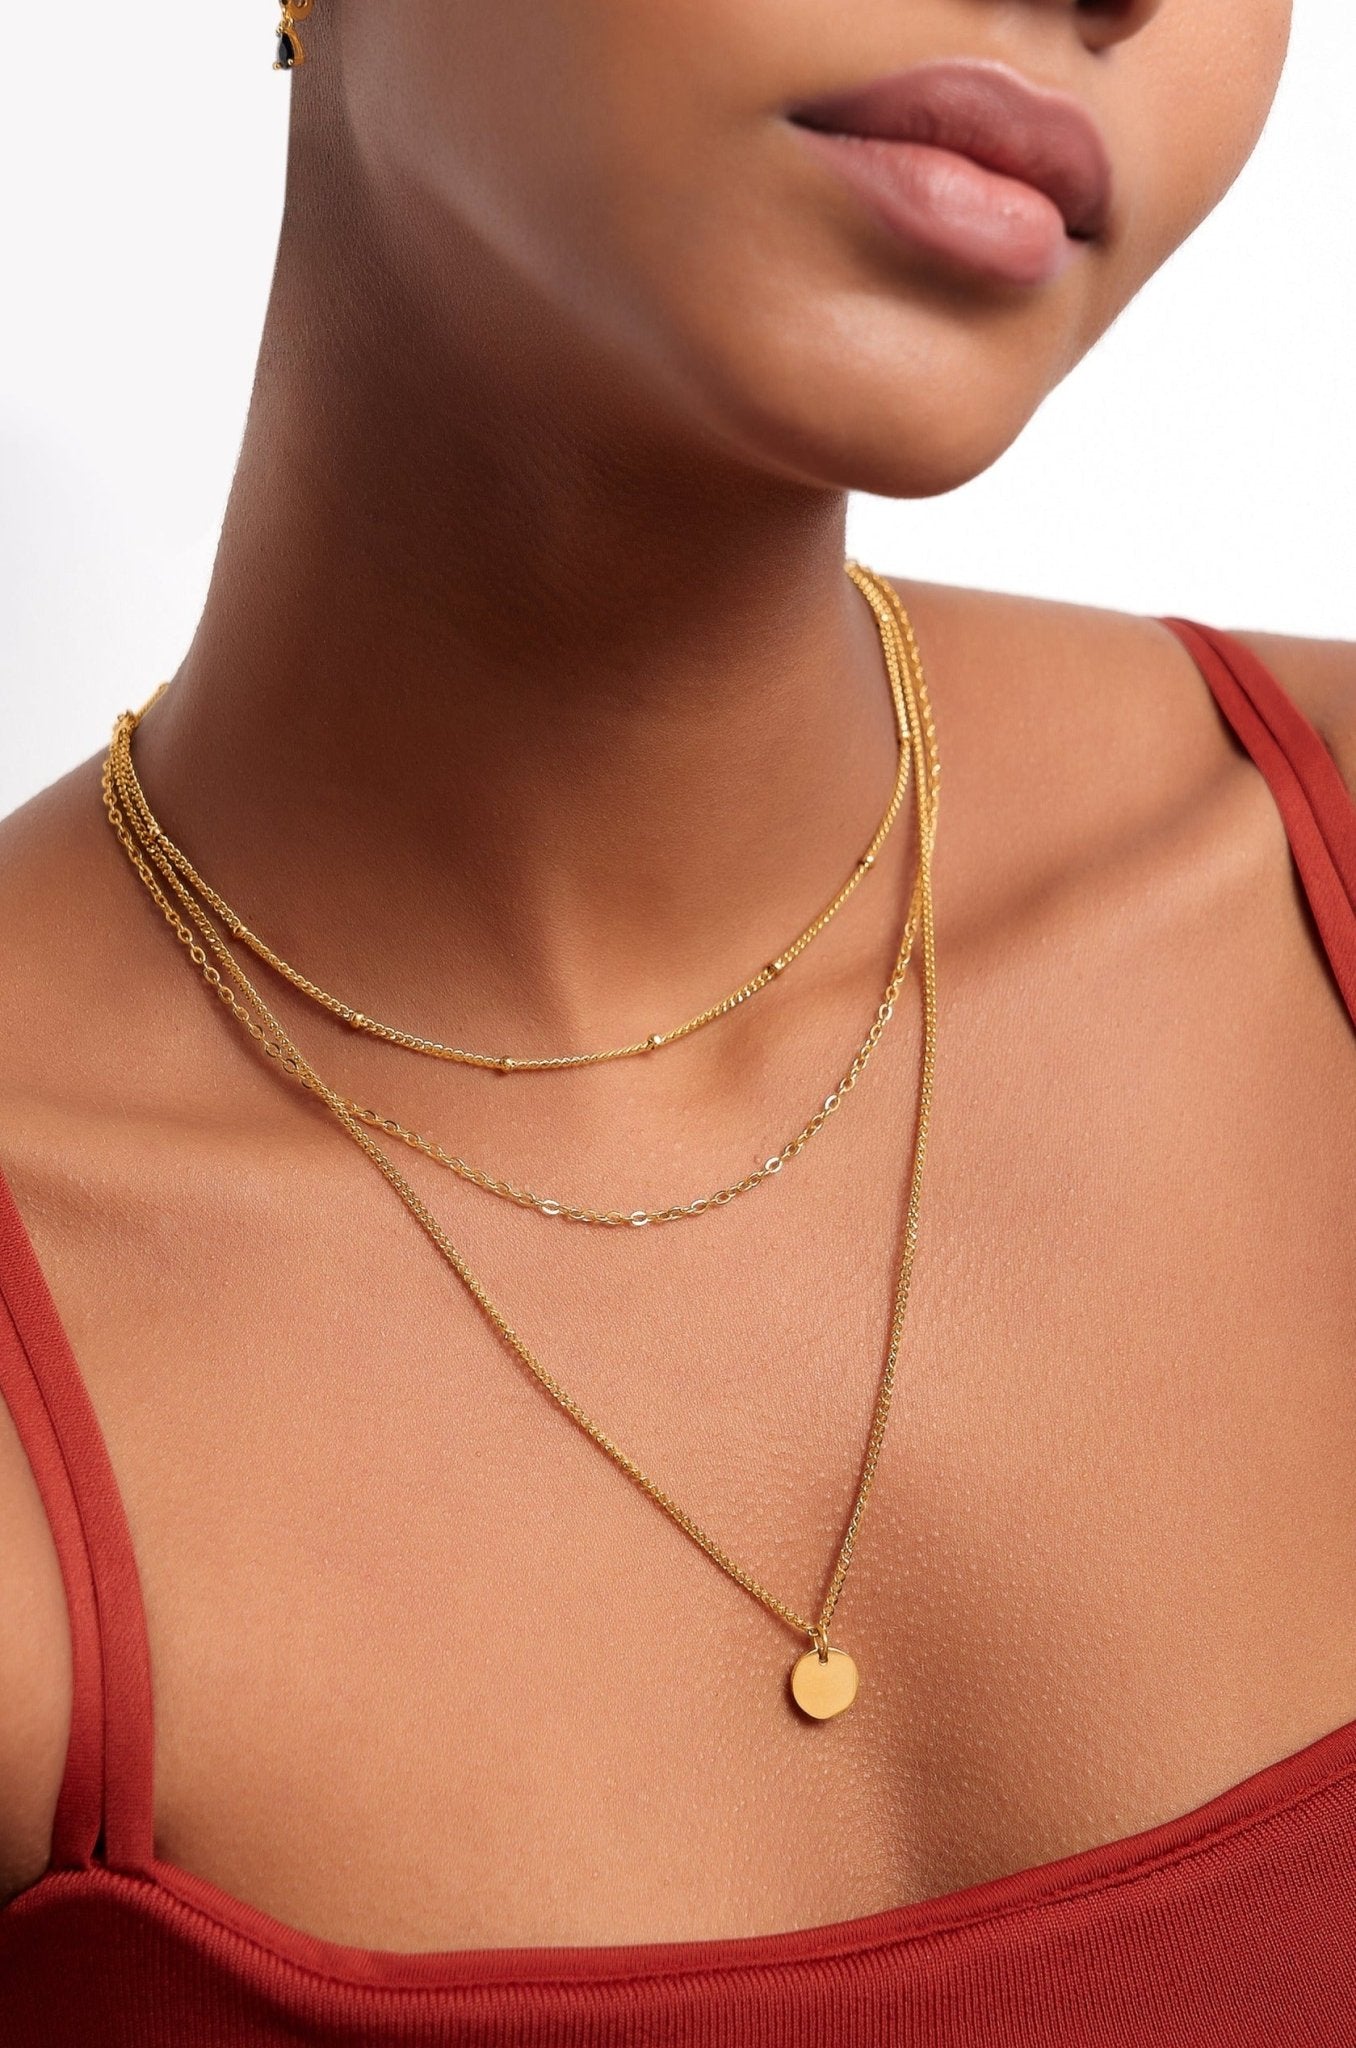 Triple Layered Necklace in Gold - Flaire & Co.